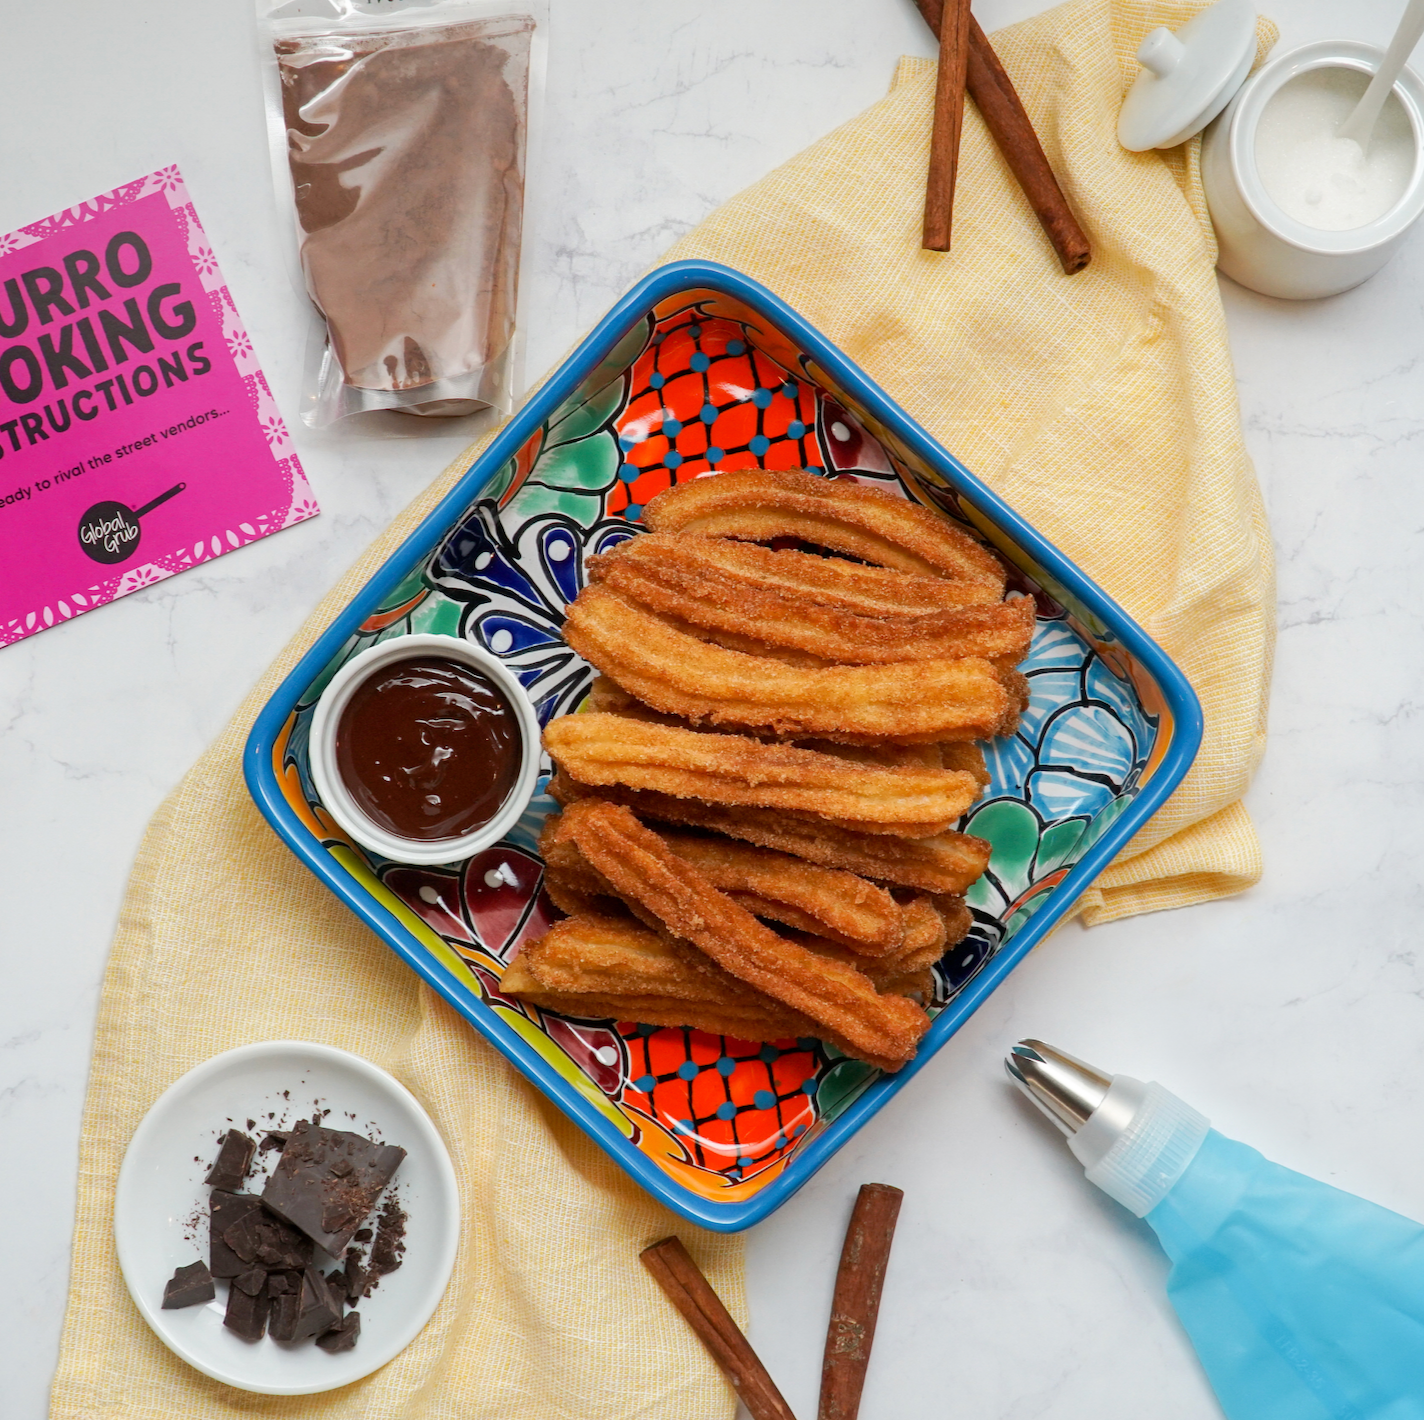 Churro with dipping chocolate and other ingredients and tools for this homemade treat